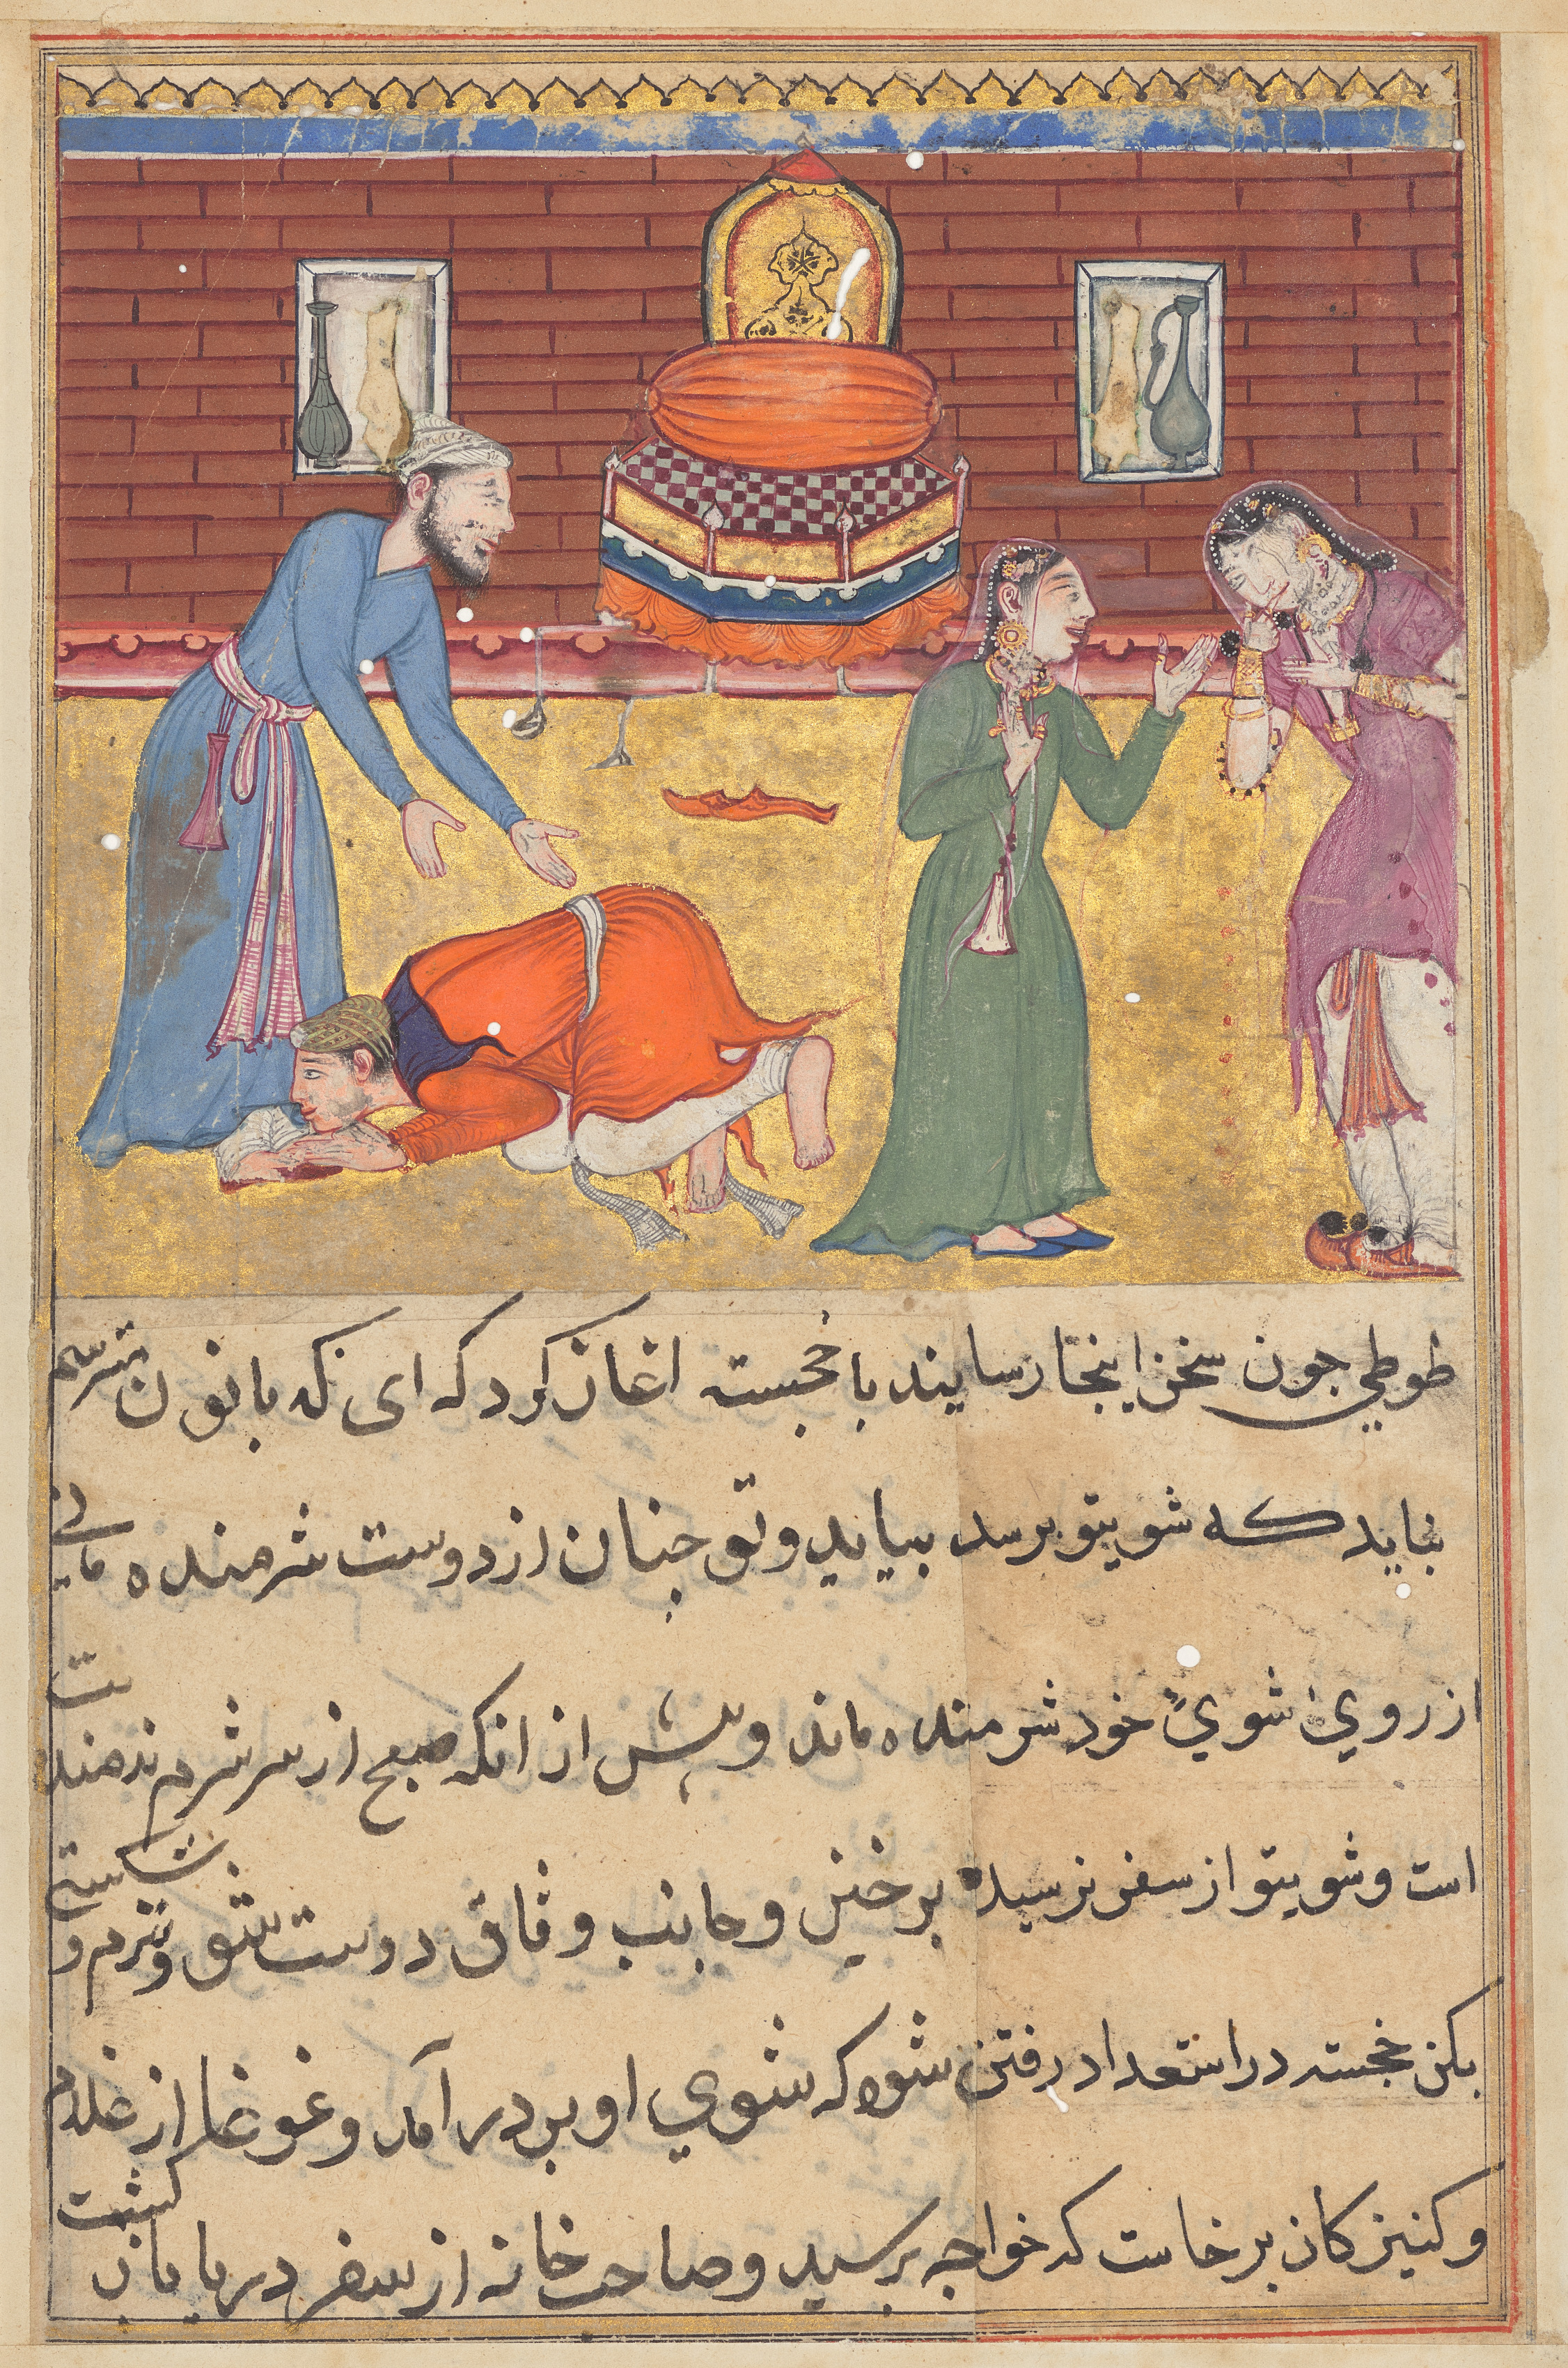 The pious man’s son, now a king, reveals himself to his father; his nurse upbraids his unfaithful mother, from a Tuti-nama (Tales of a Parrot): Fifty-second Night